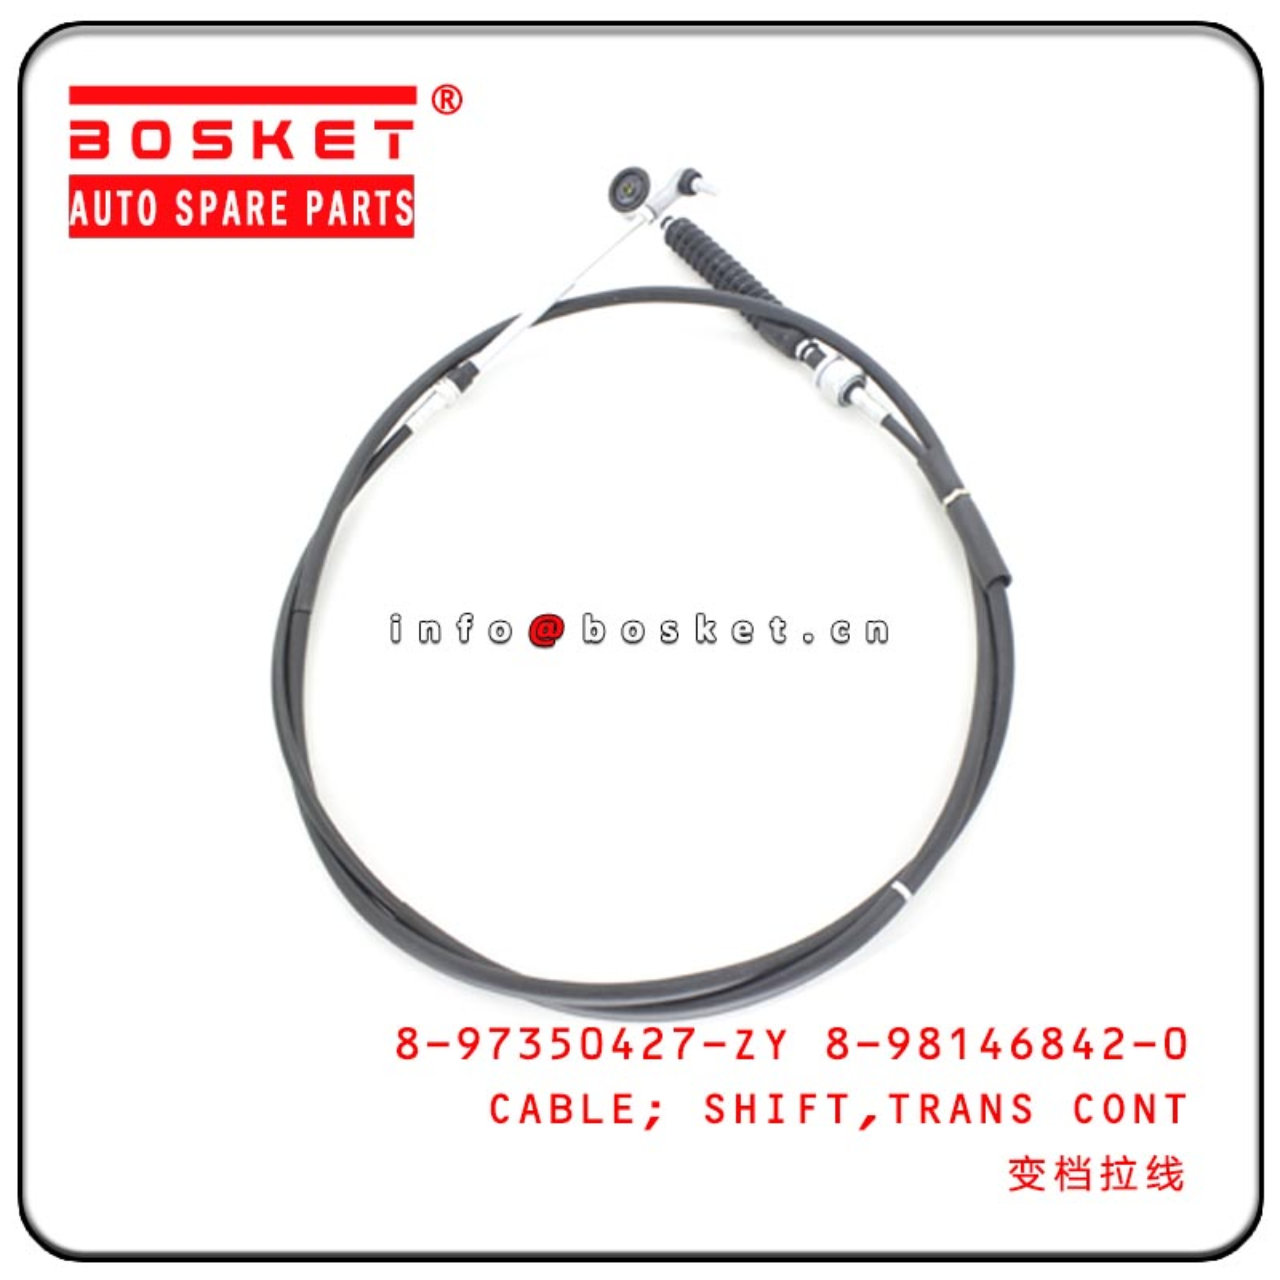 8-97350427-ZY 8-98146842-0 897350427ZY 8981468420 Transmission Control Shift Cable Suitable For ISUZ